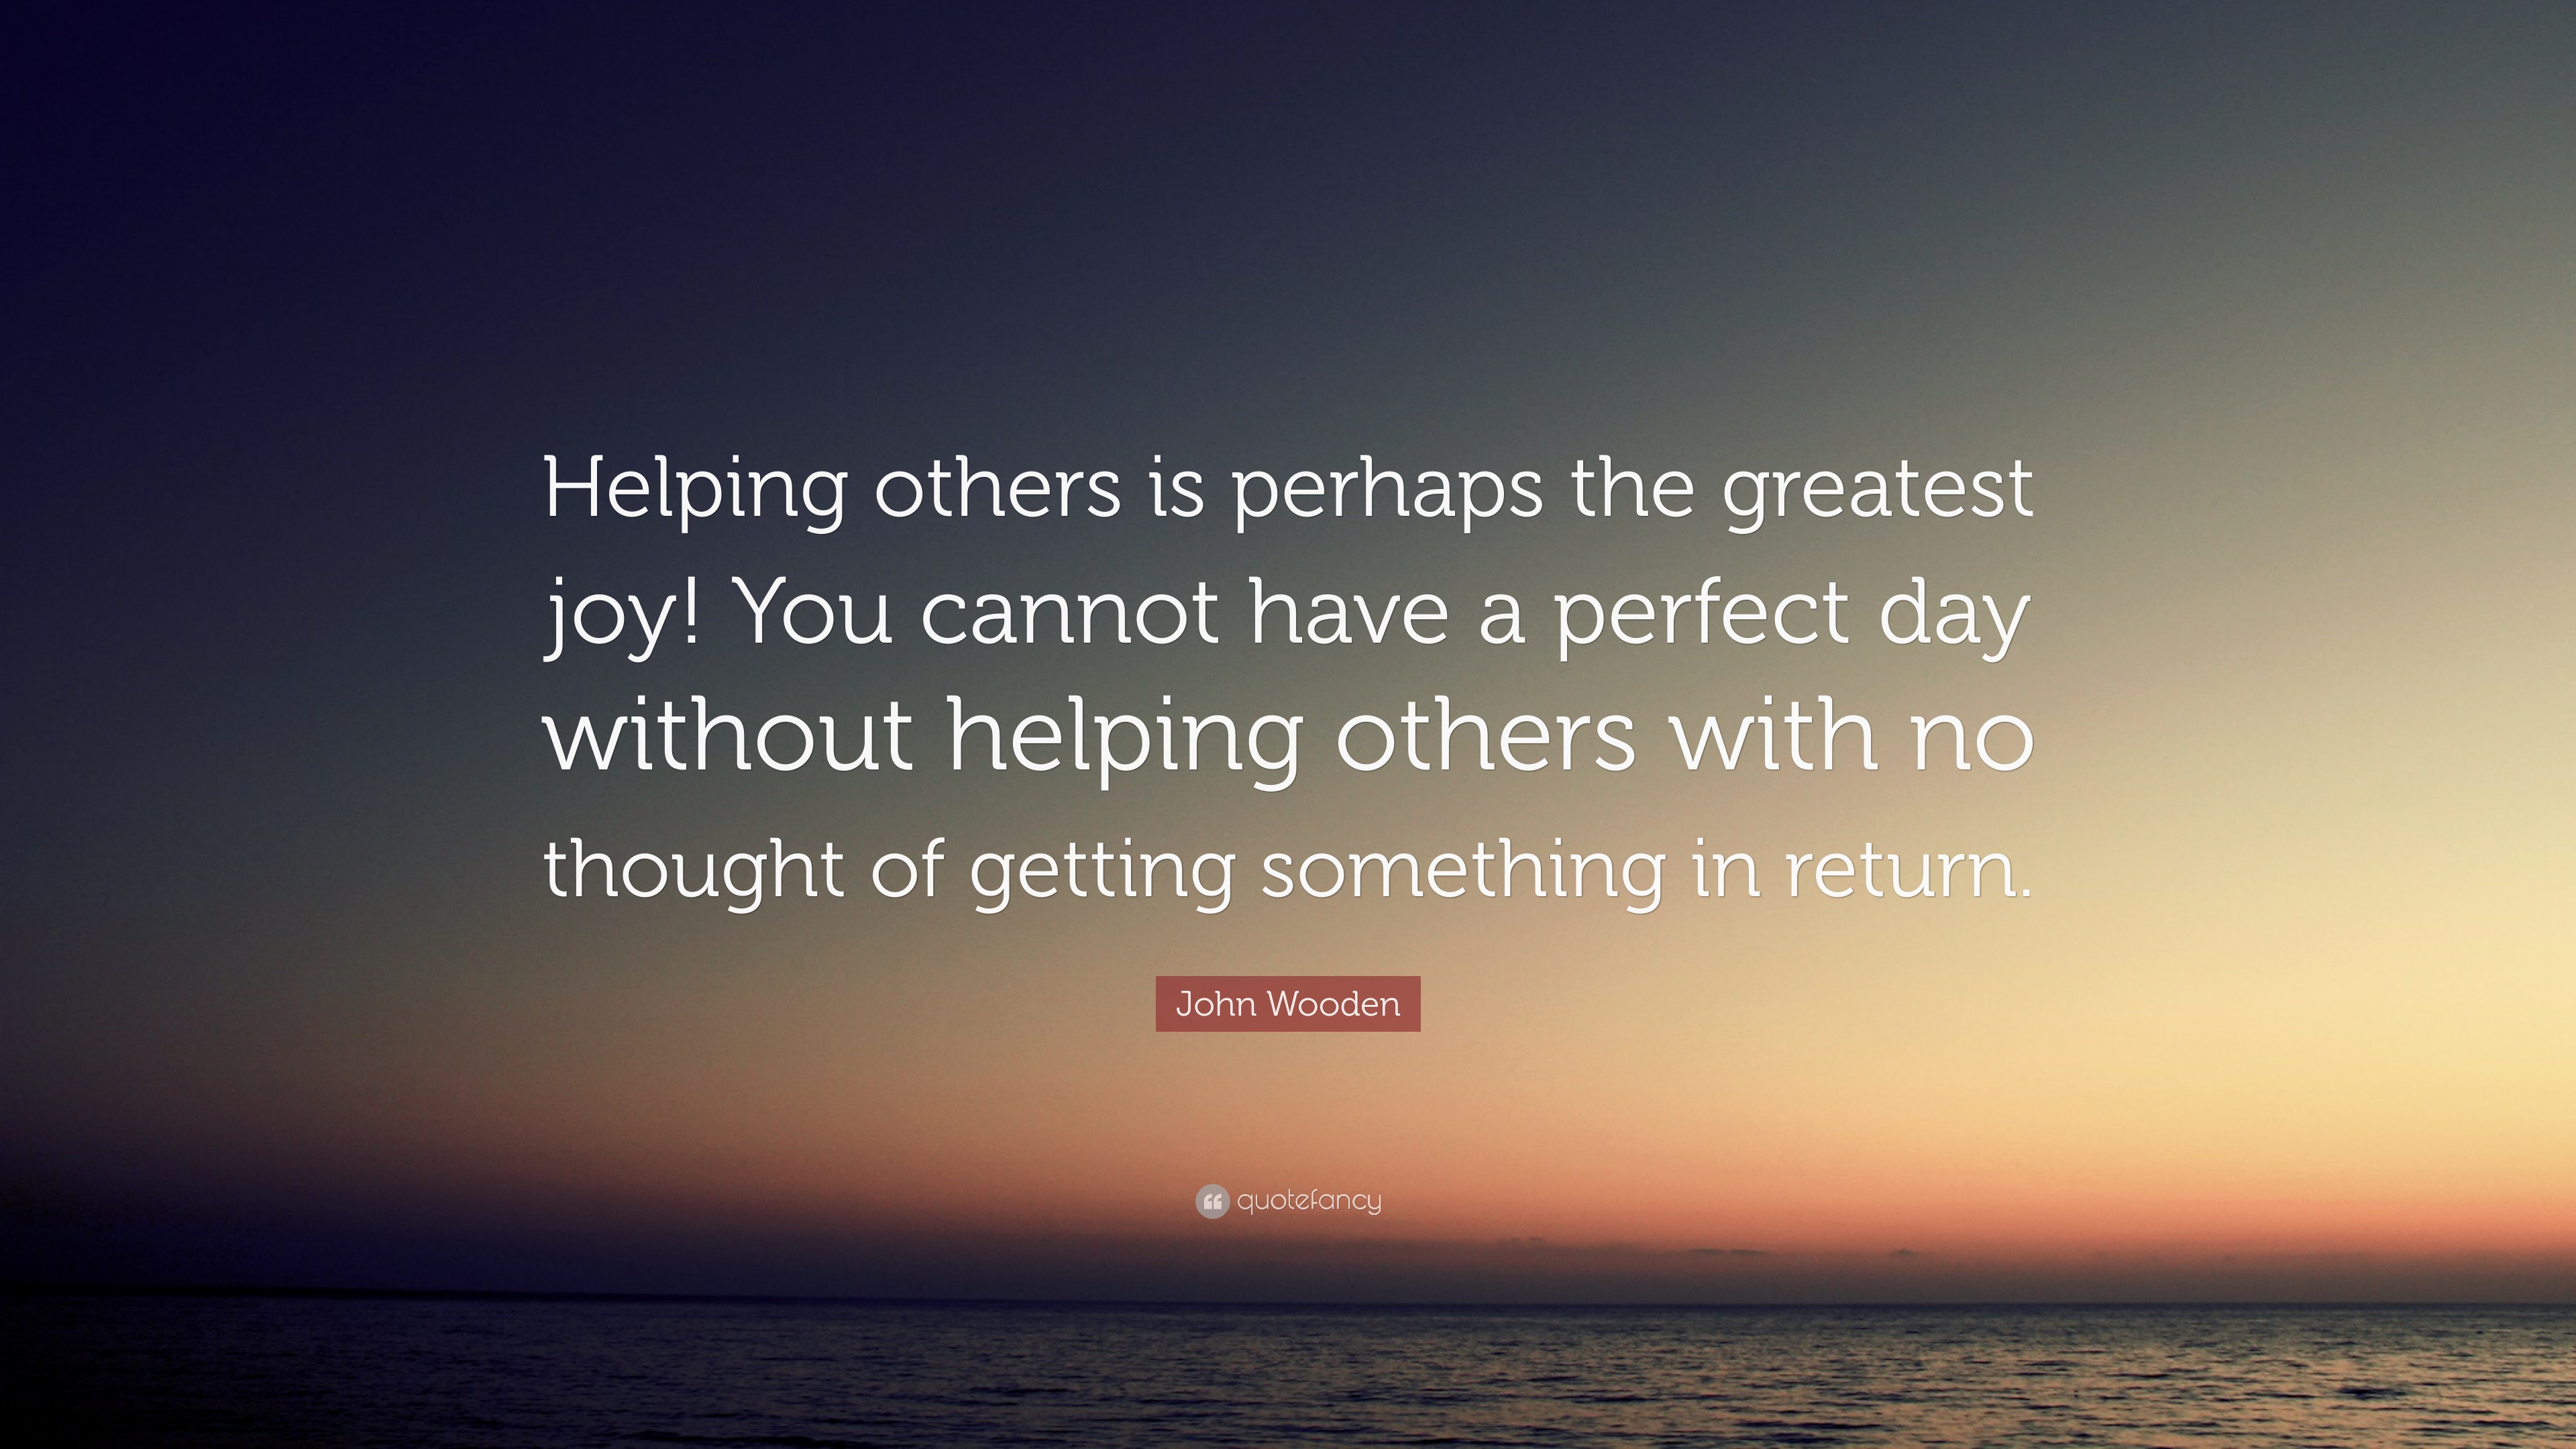 John Wooden Quote: “Helping others is perhaps the greatest joy! You cannot have a perfect day without helping others with no thought of gett.”